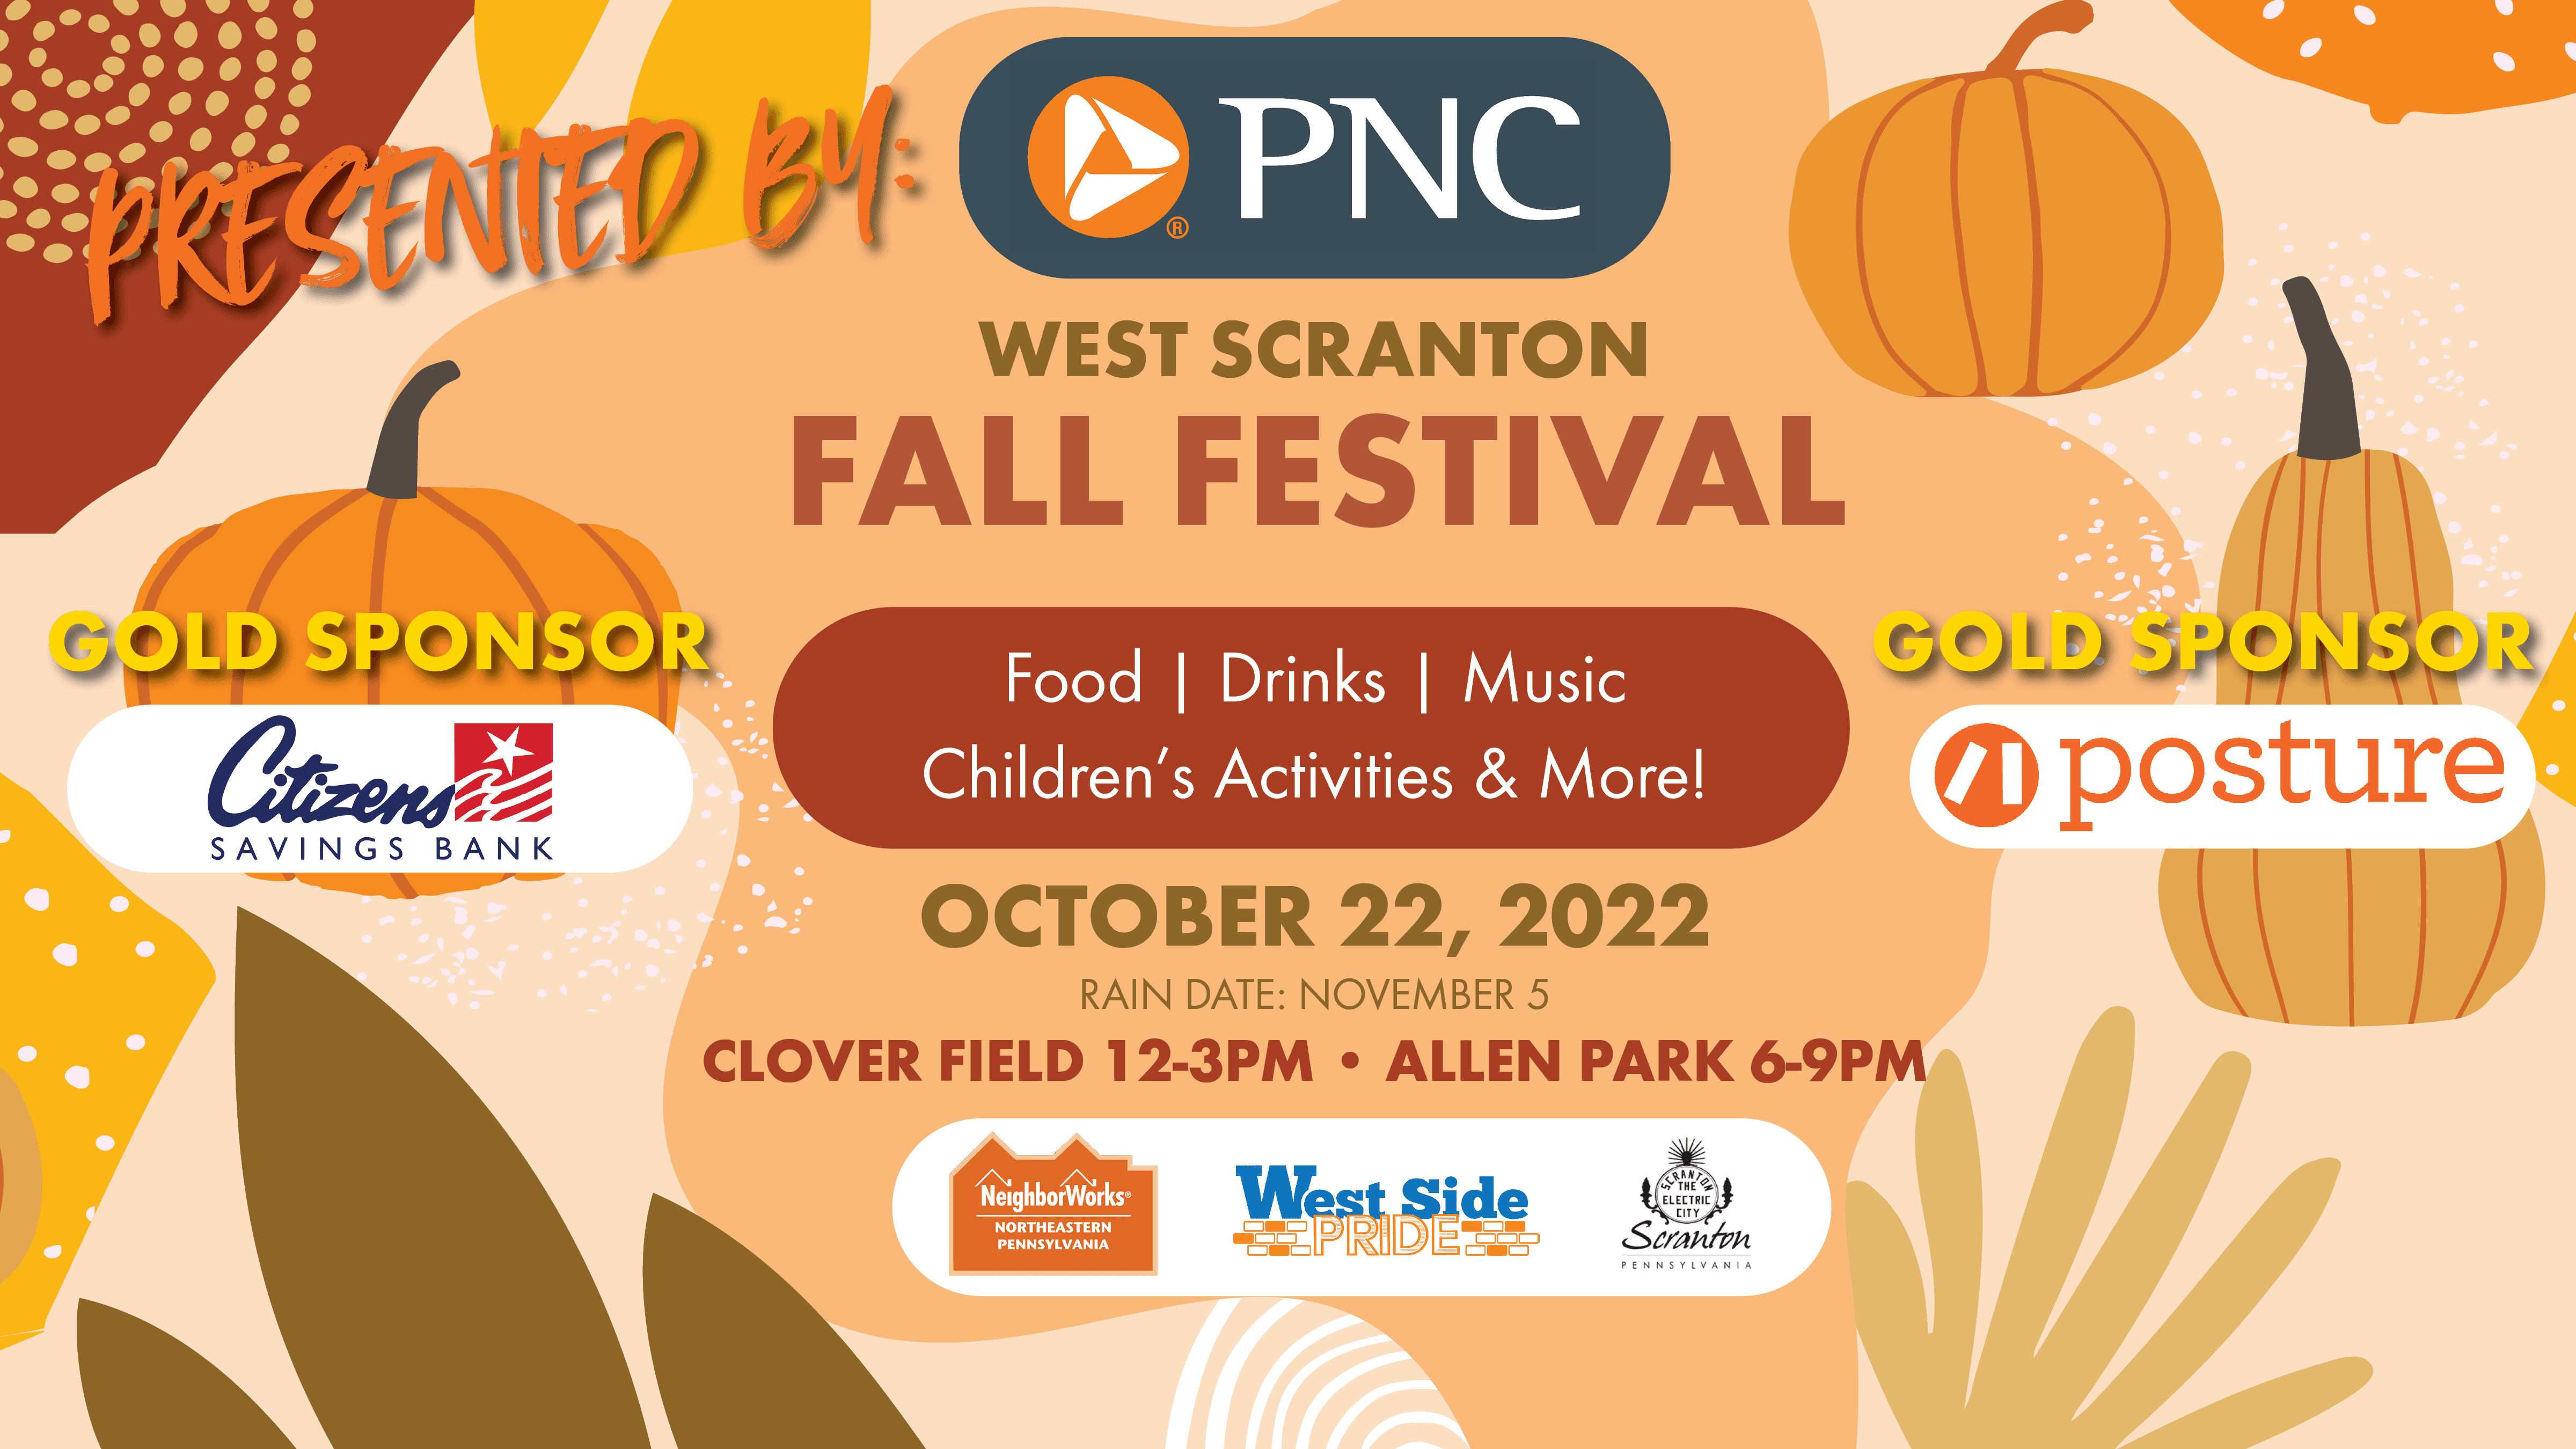 Join us at the West Scranton Fall Festival